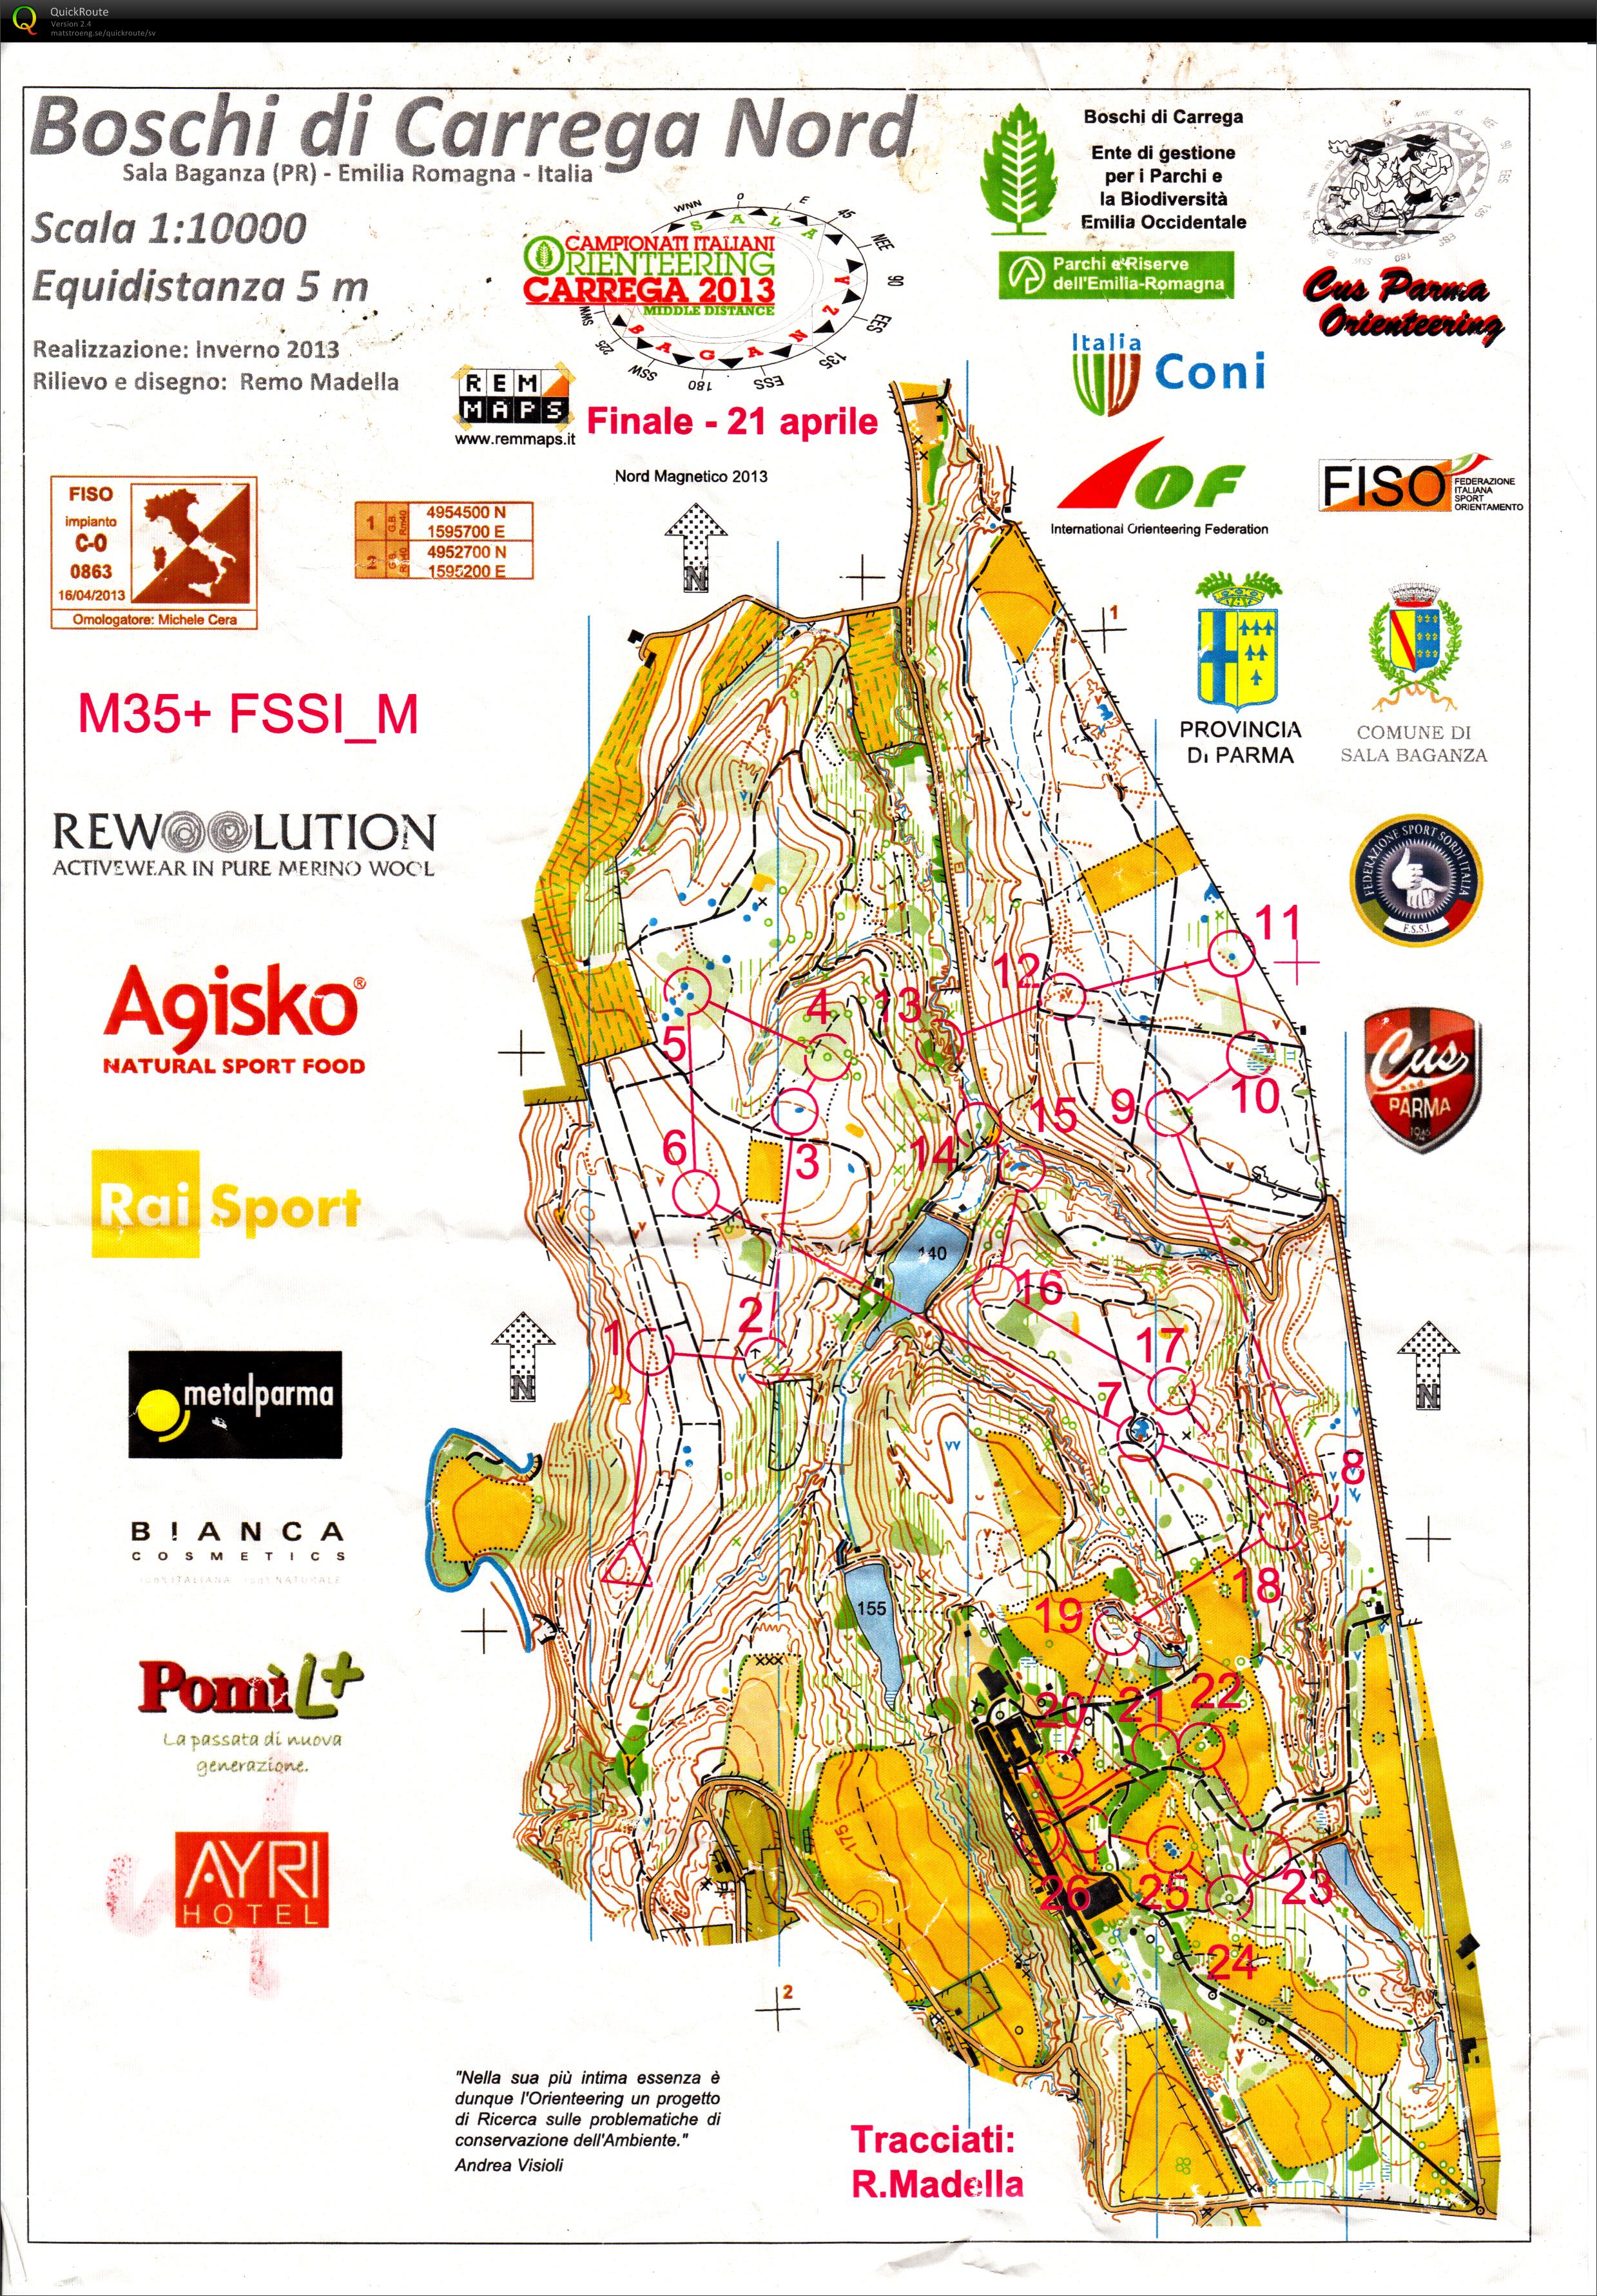 Italian Championship Middle Distance Final (2013-04-21)